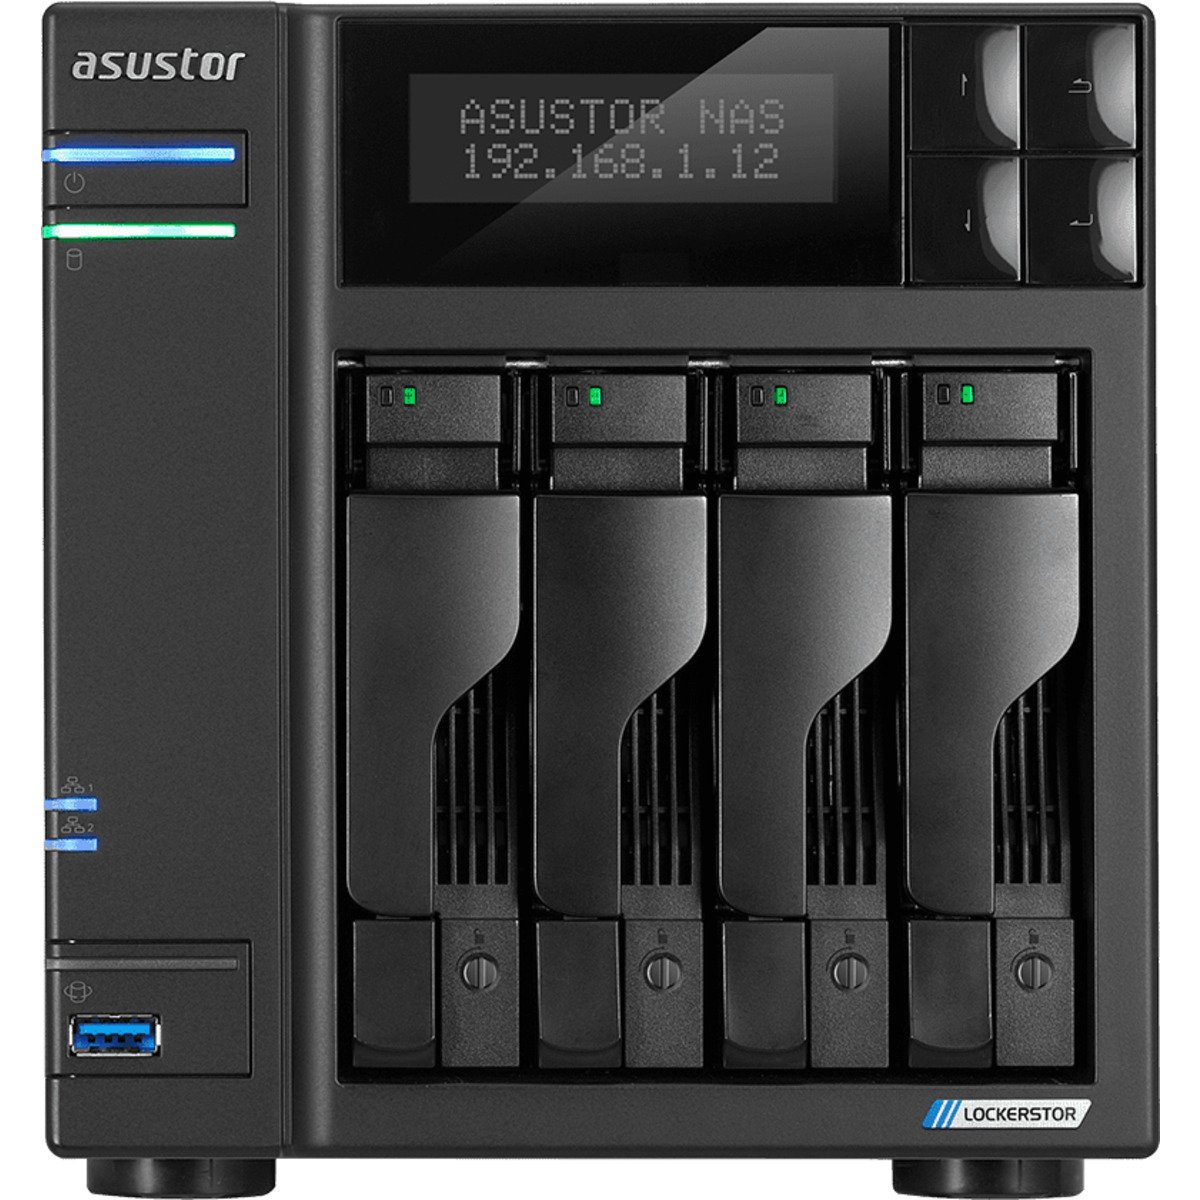 ASUSTOR AS6604T Lockerstor 4 56tb 4-Bay Desktop Multimedia / Power User / Business NAS - Network Attached Storage Device 4x14tb Seagate IronWolf Pro ST14000NT001 3.5 7200rpm SATA 6Gb/s HDD NAS Class Drives Installed - Burn-In Tested - FREE RAM UPGRADE AS6604T Lockerstor 4